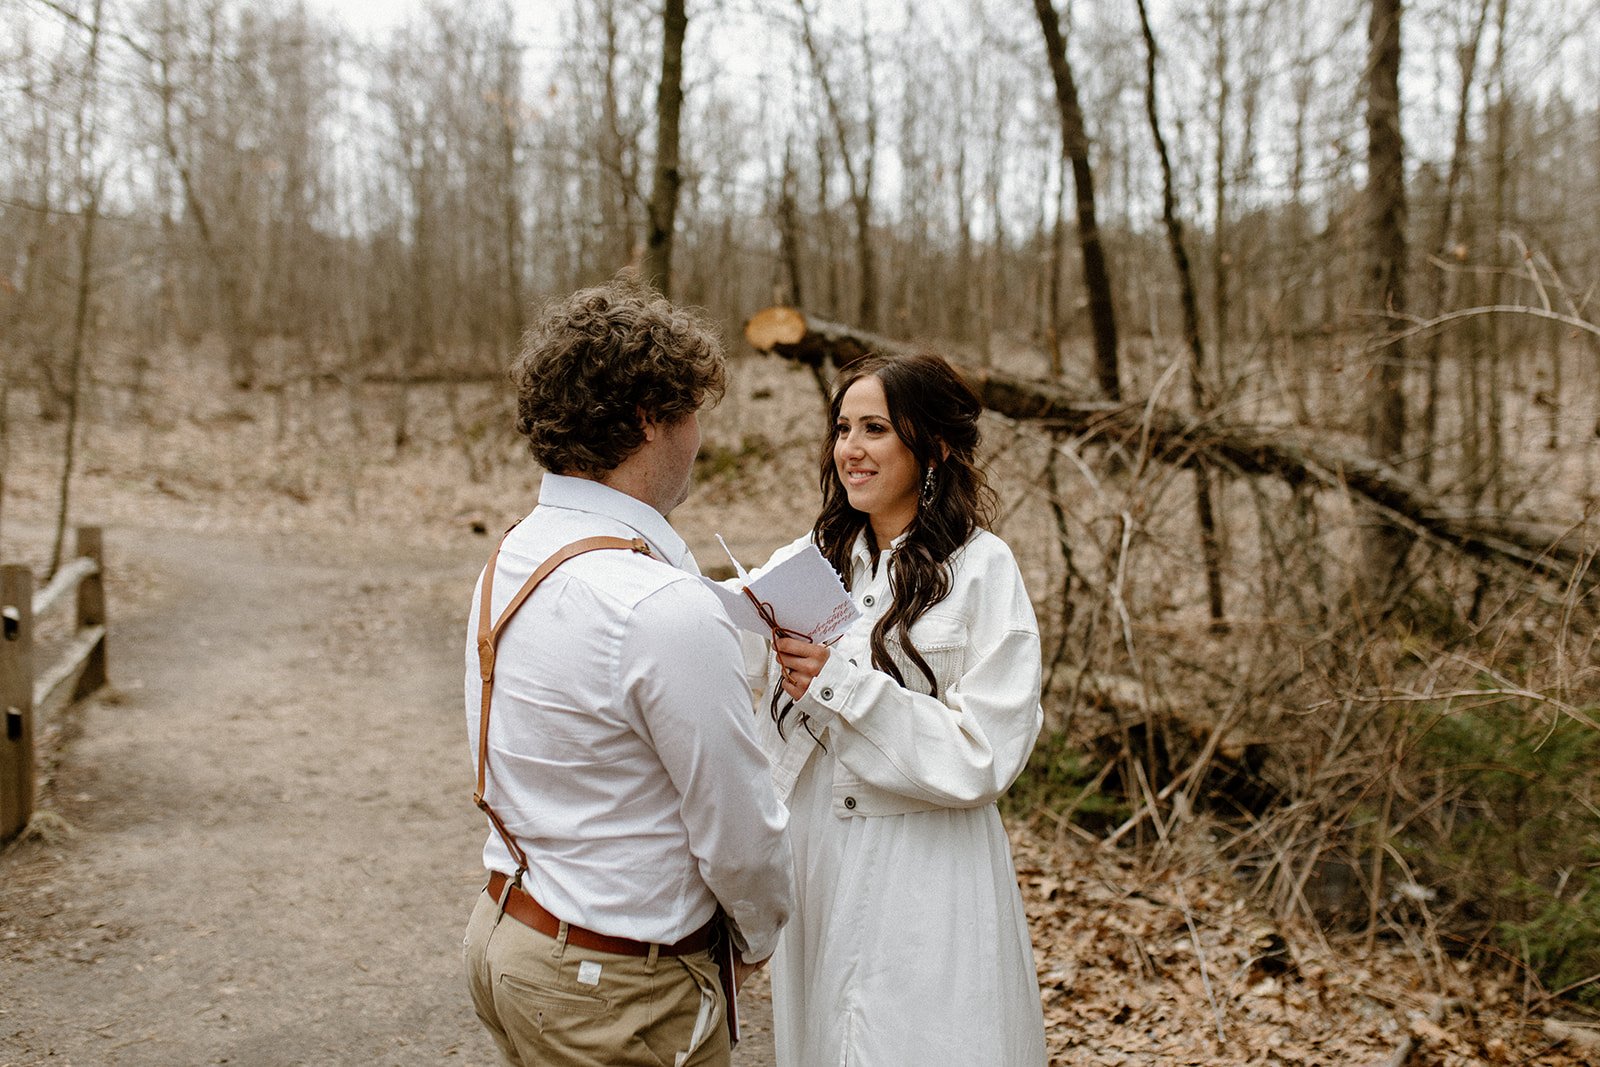 Vow exchange for adventure elopement on north country trail in michigan